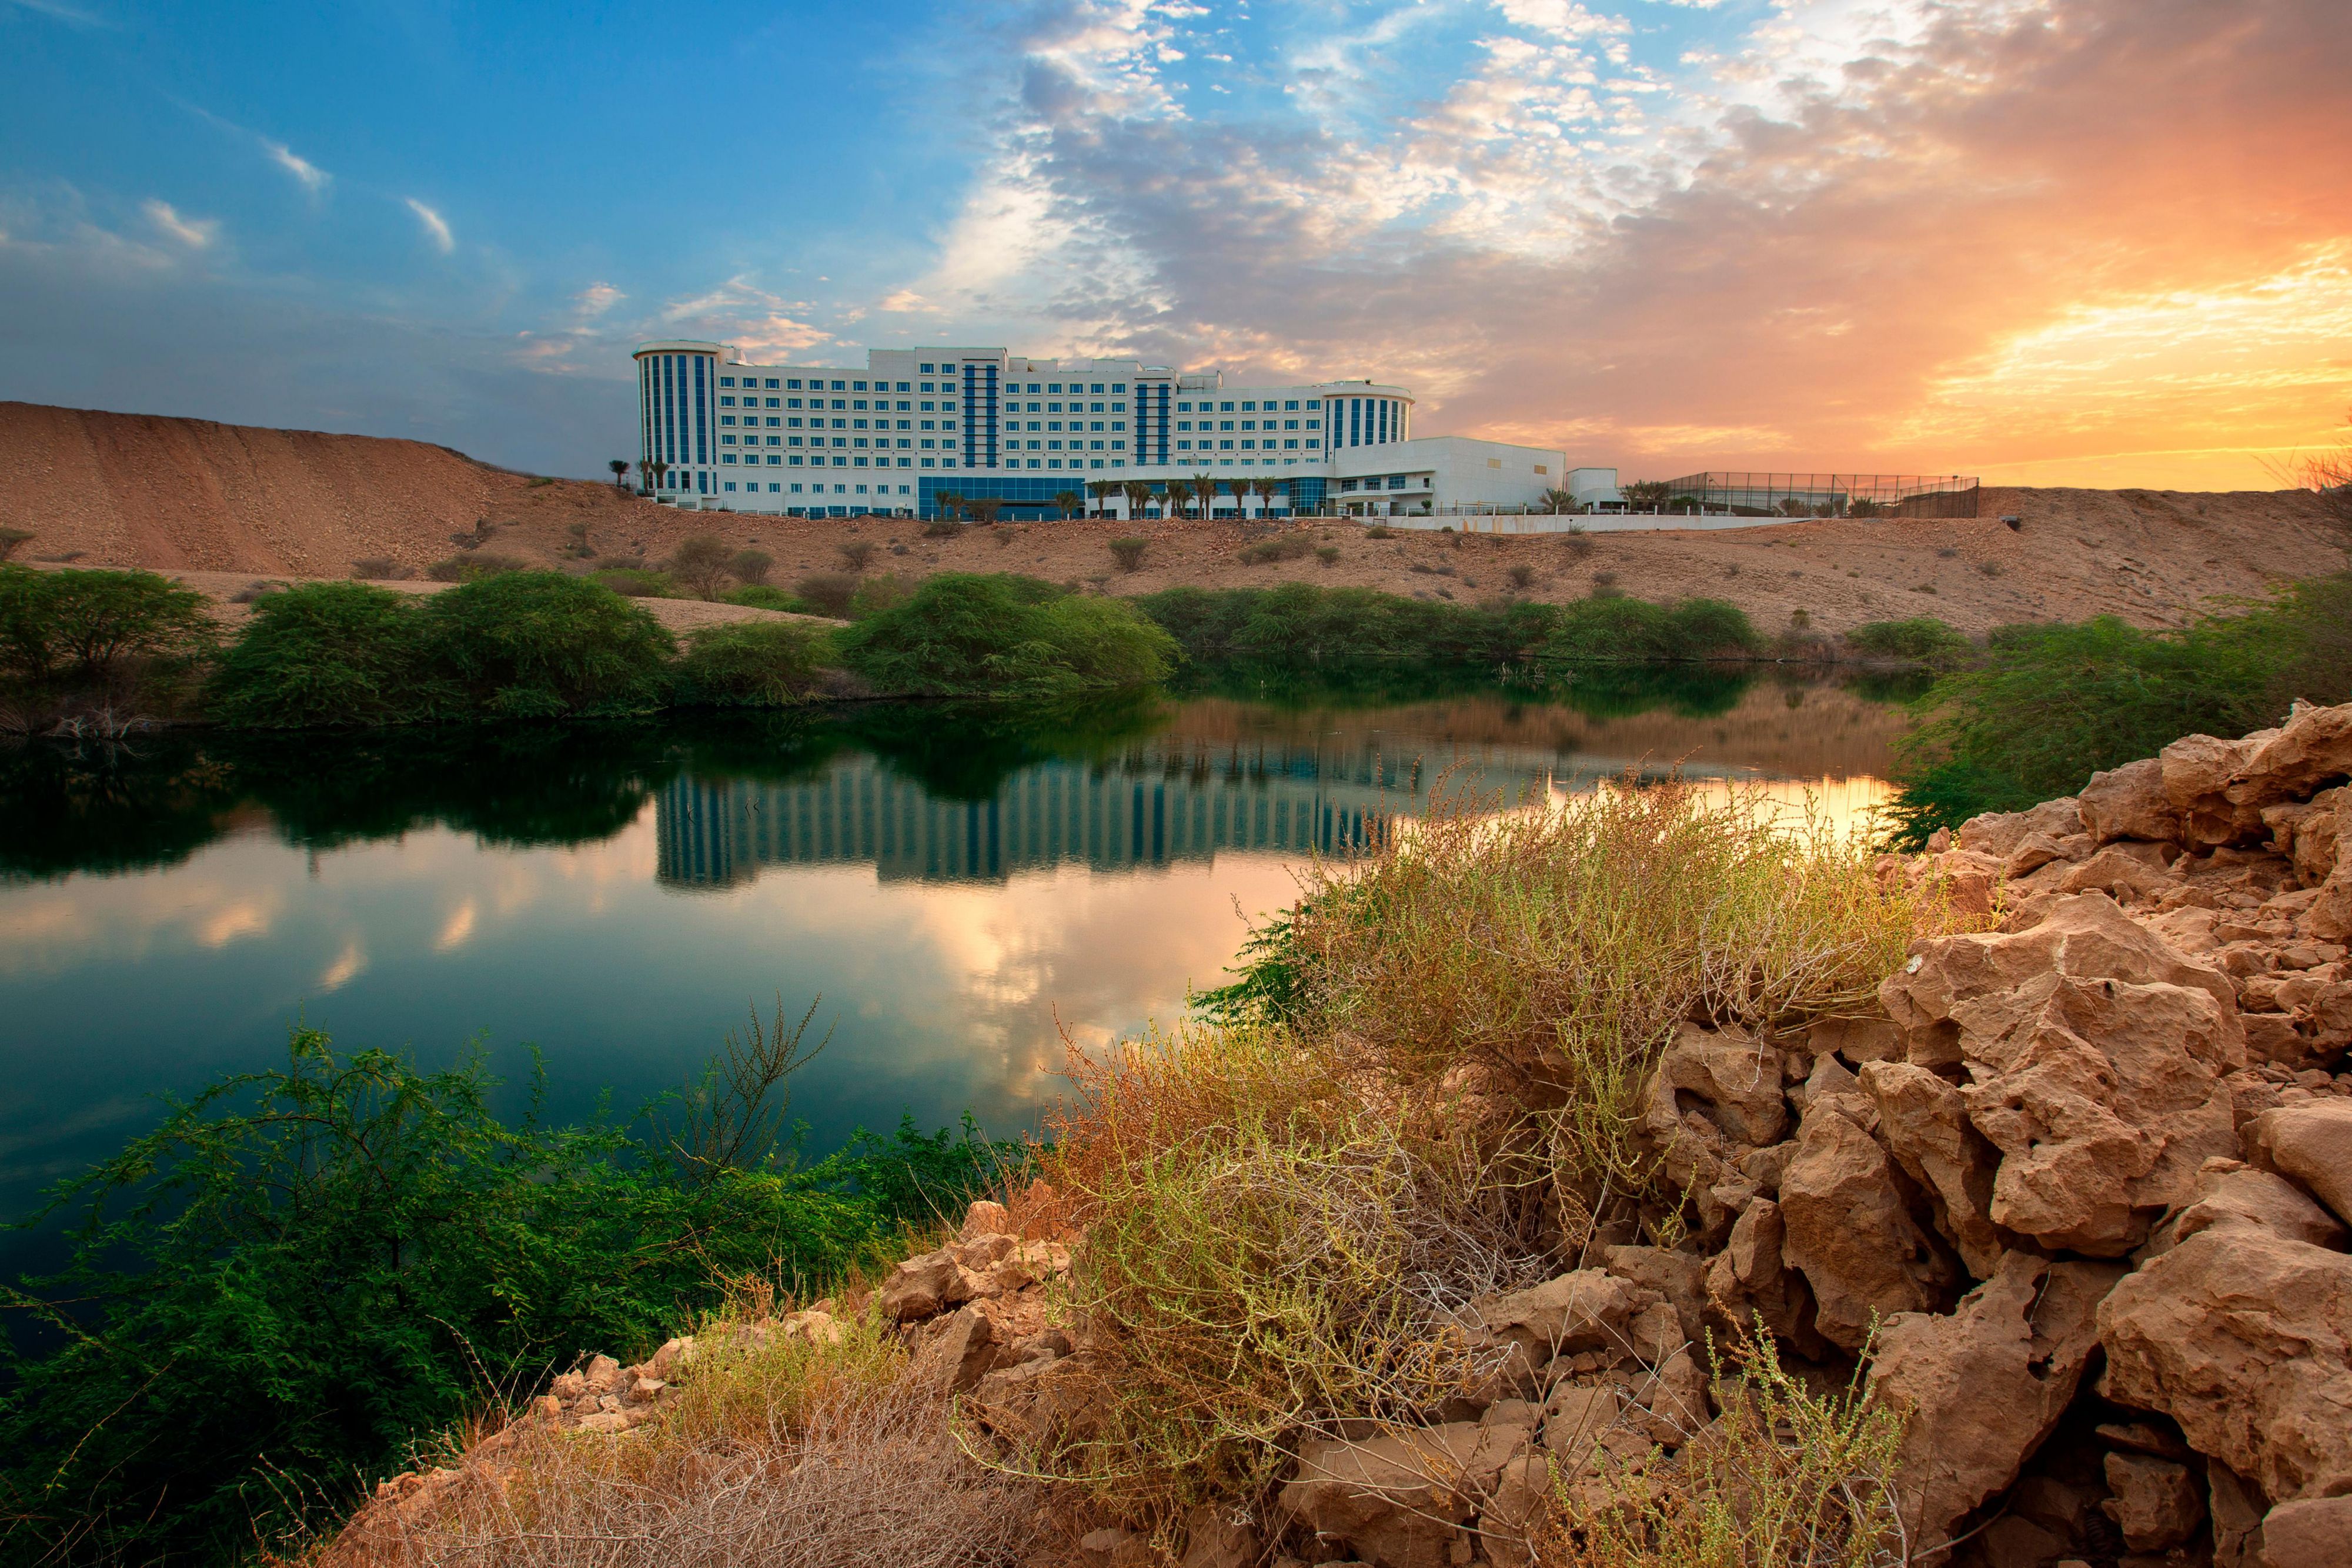 Crowne Plaza OCEC seen from the other side of the Wadi